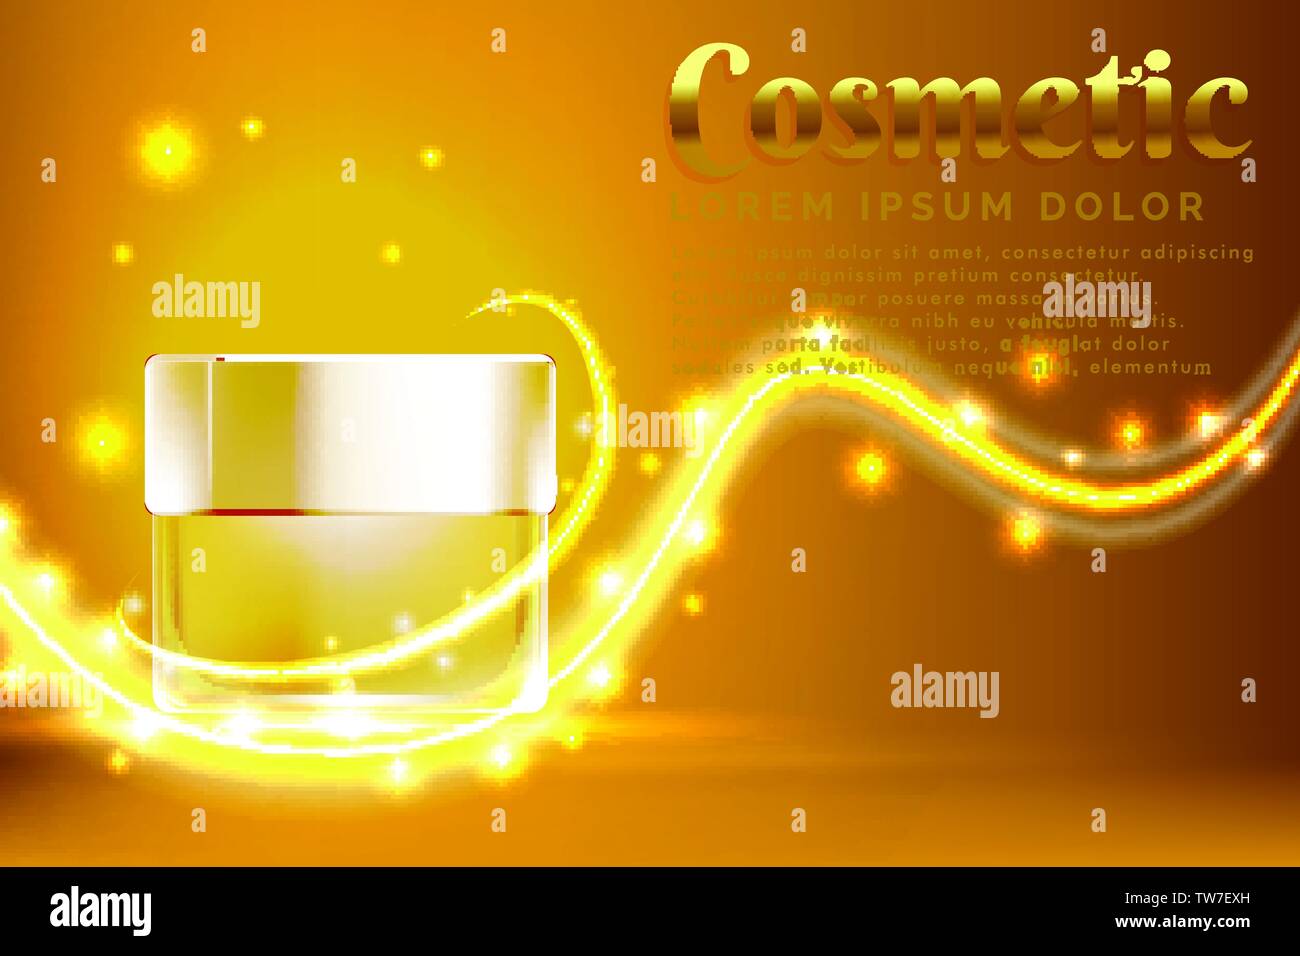 Download Cream Jar Cosmetic Products Ad With Shiny Gold Background Stock Vector Image Art Alamy Yellowimages Mockups